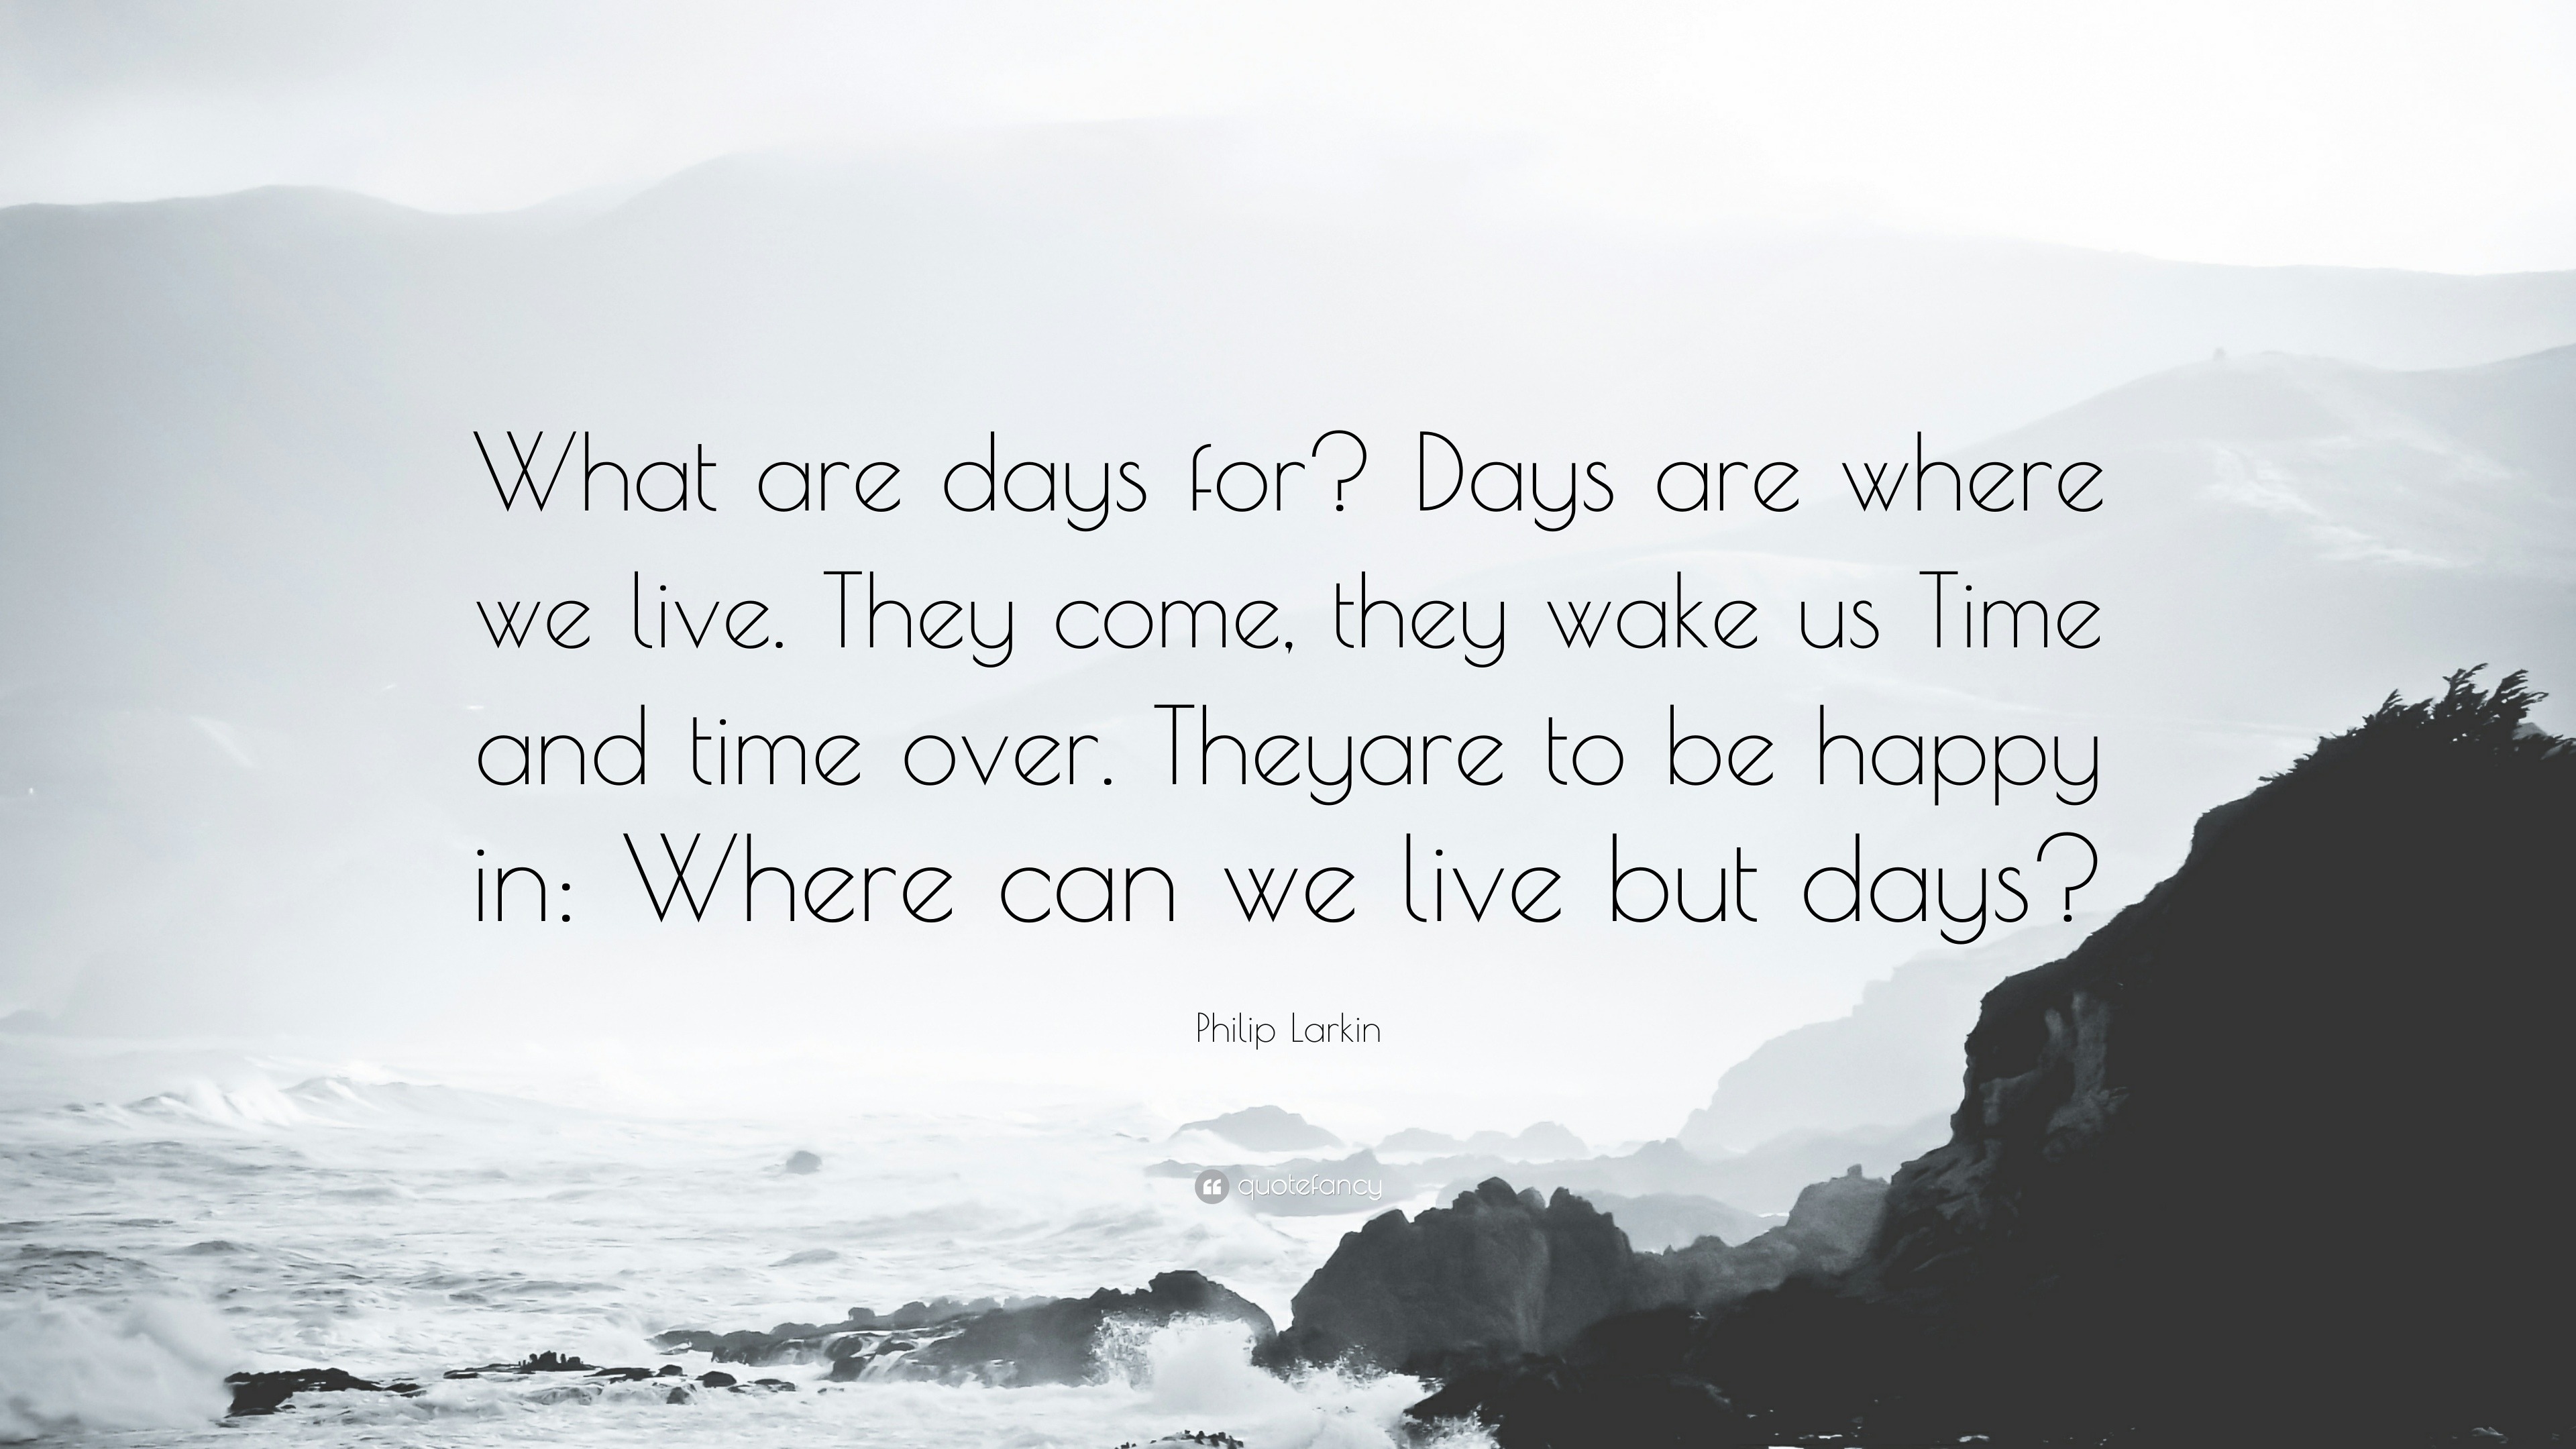 Philip Larkin Quote: “What are days for? Days are where we live. They come,  they wake us Time and time over. Theyare to be happy in: Where can...”